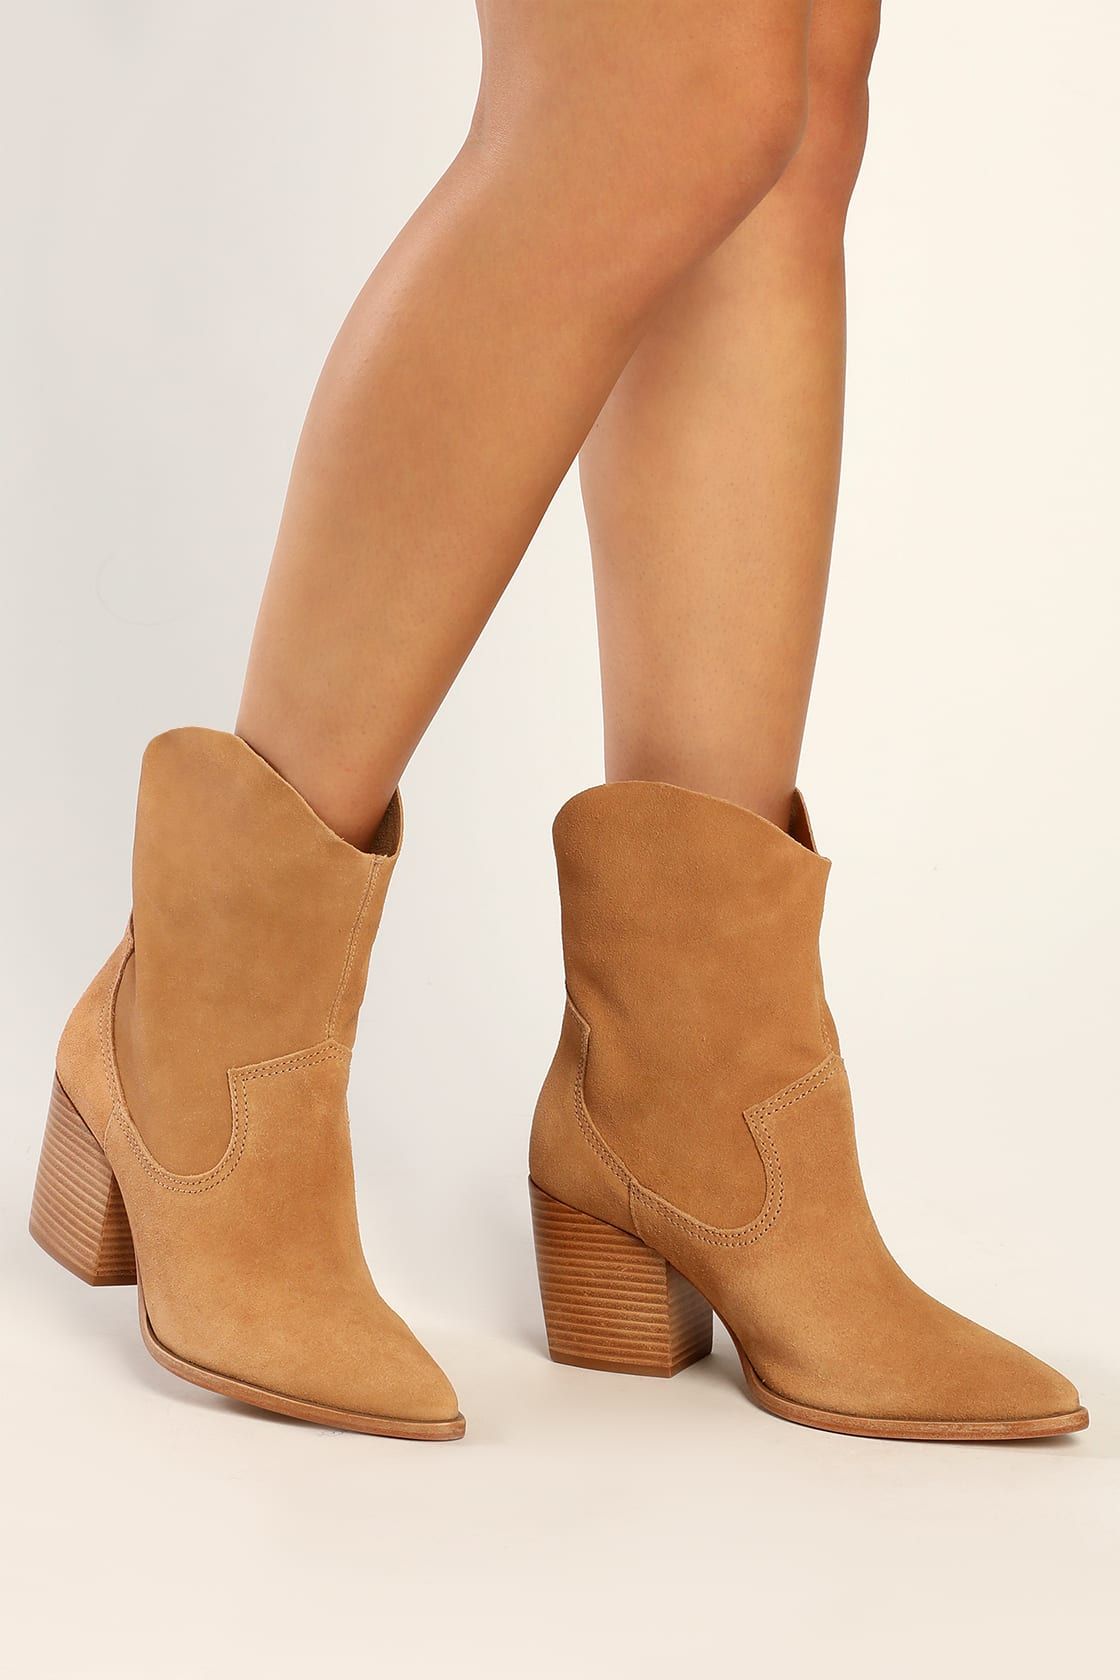 Tessie Honeycomb Suede Leather Mid-Calf Western Boots | Lulus (US)